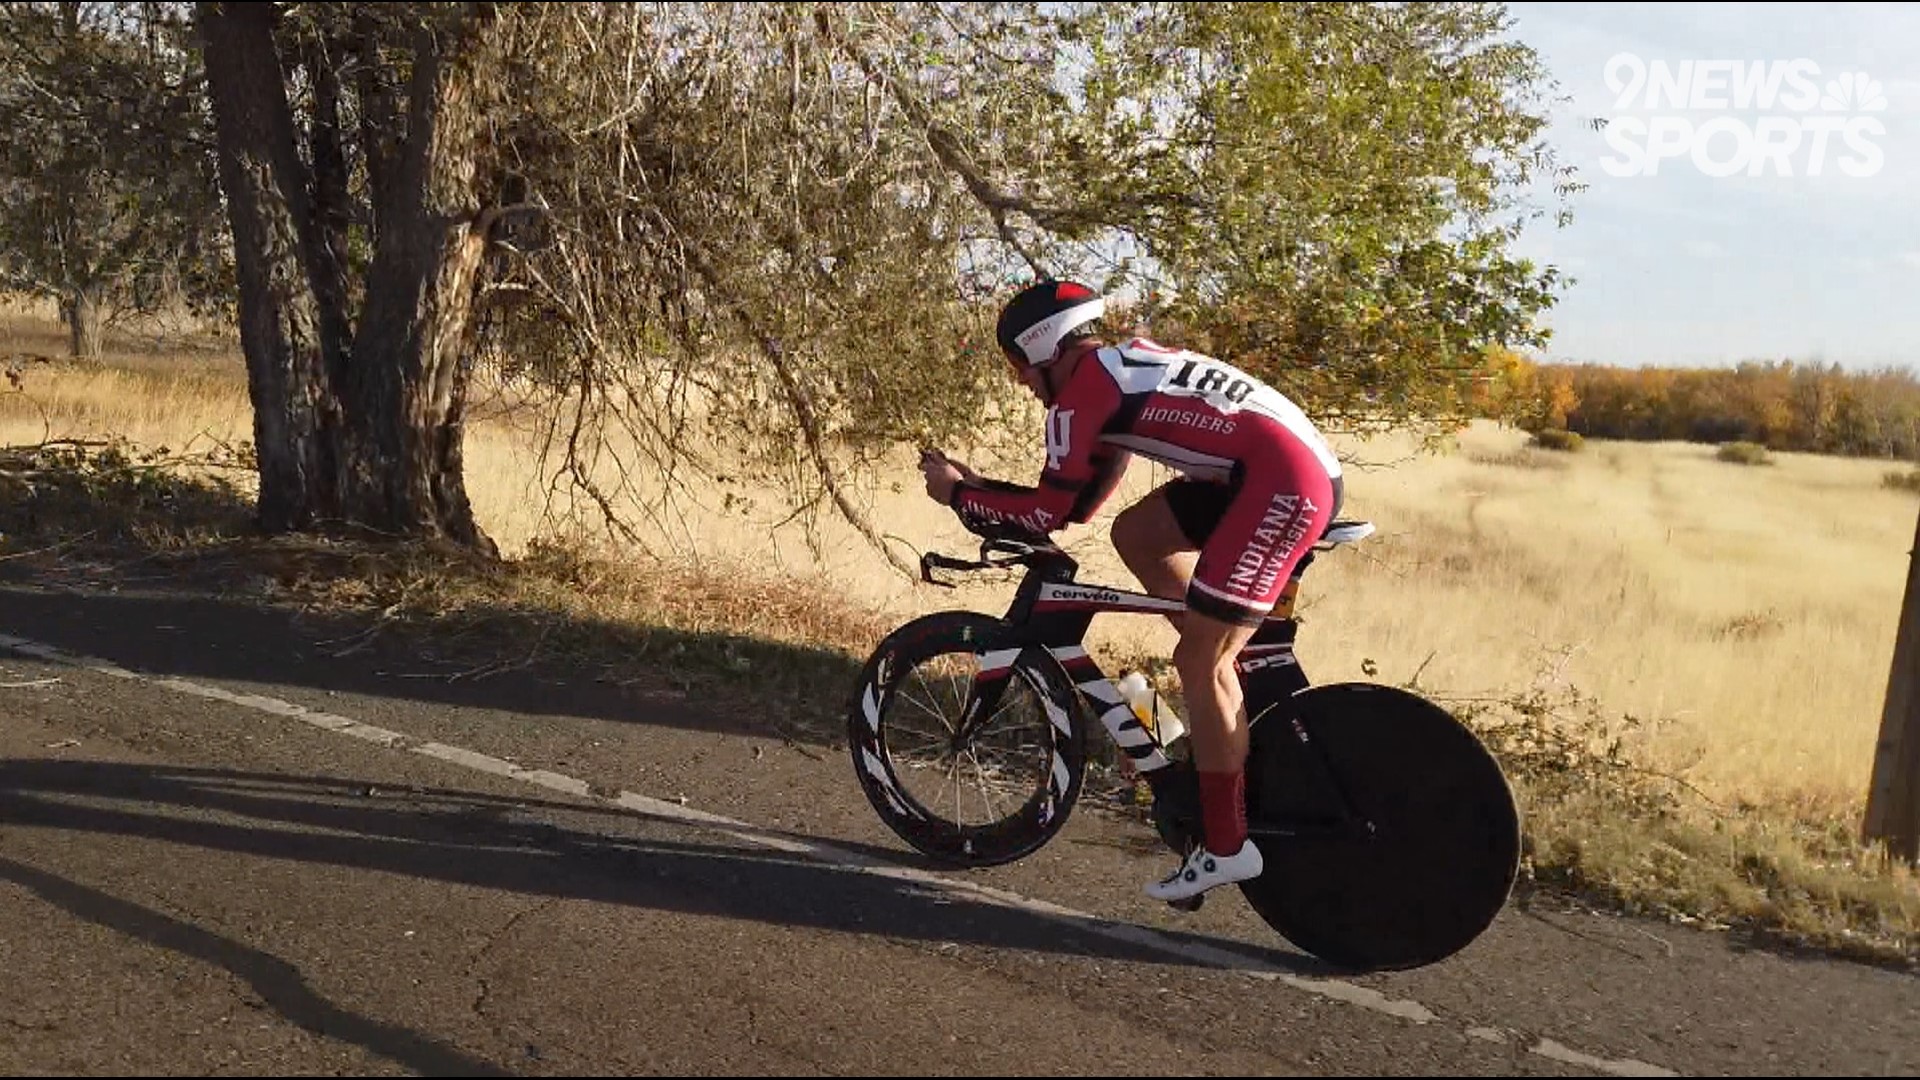 The final time trial race of 2020 will take place on Wednesday at Cherry Creek State Park.